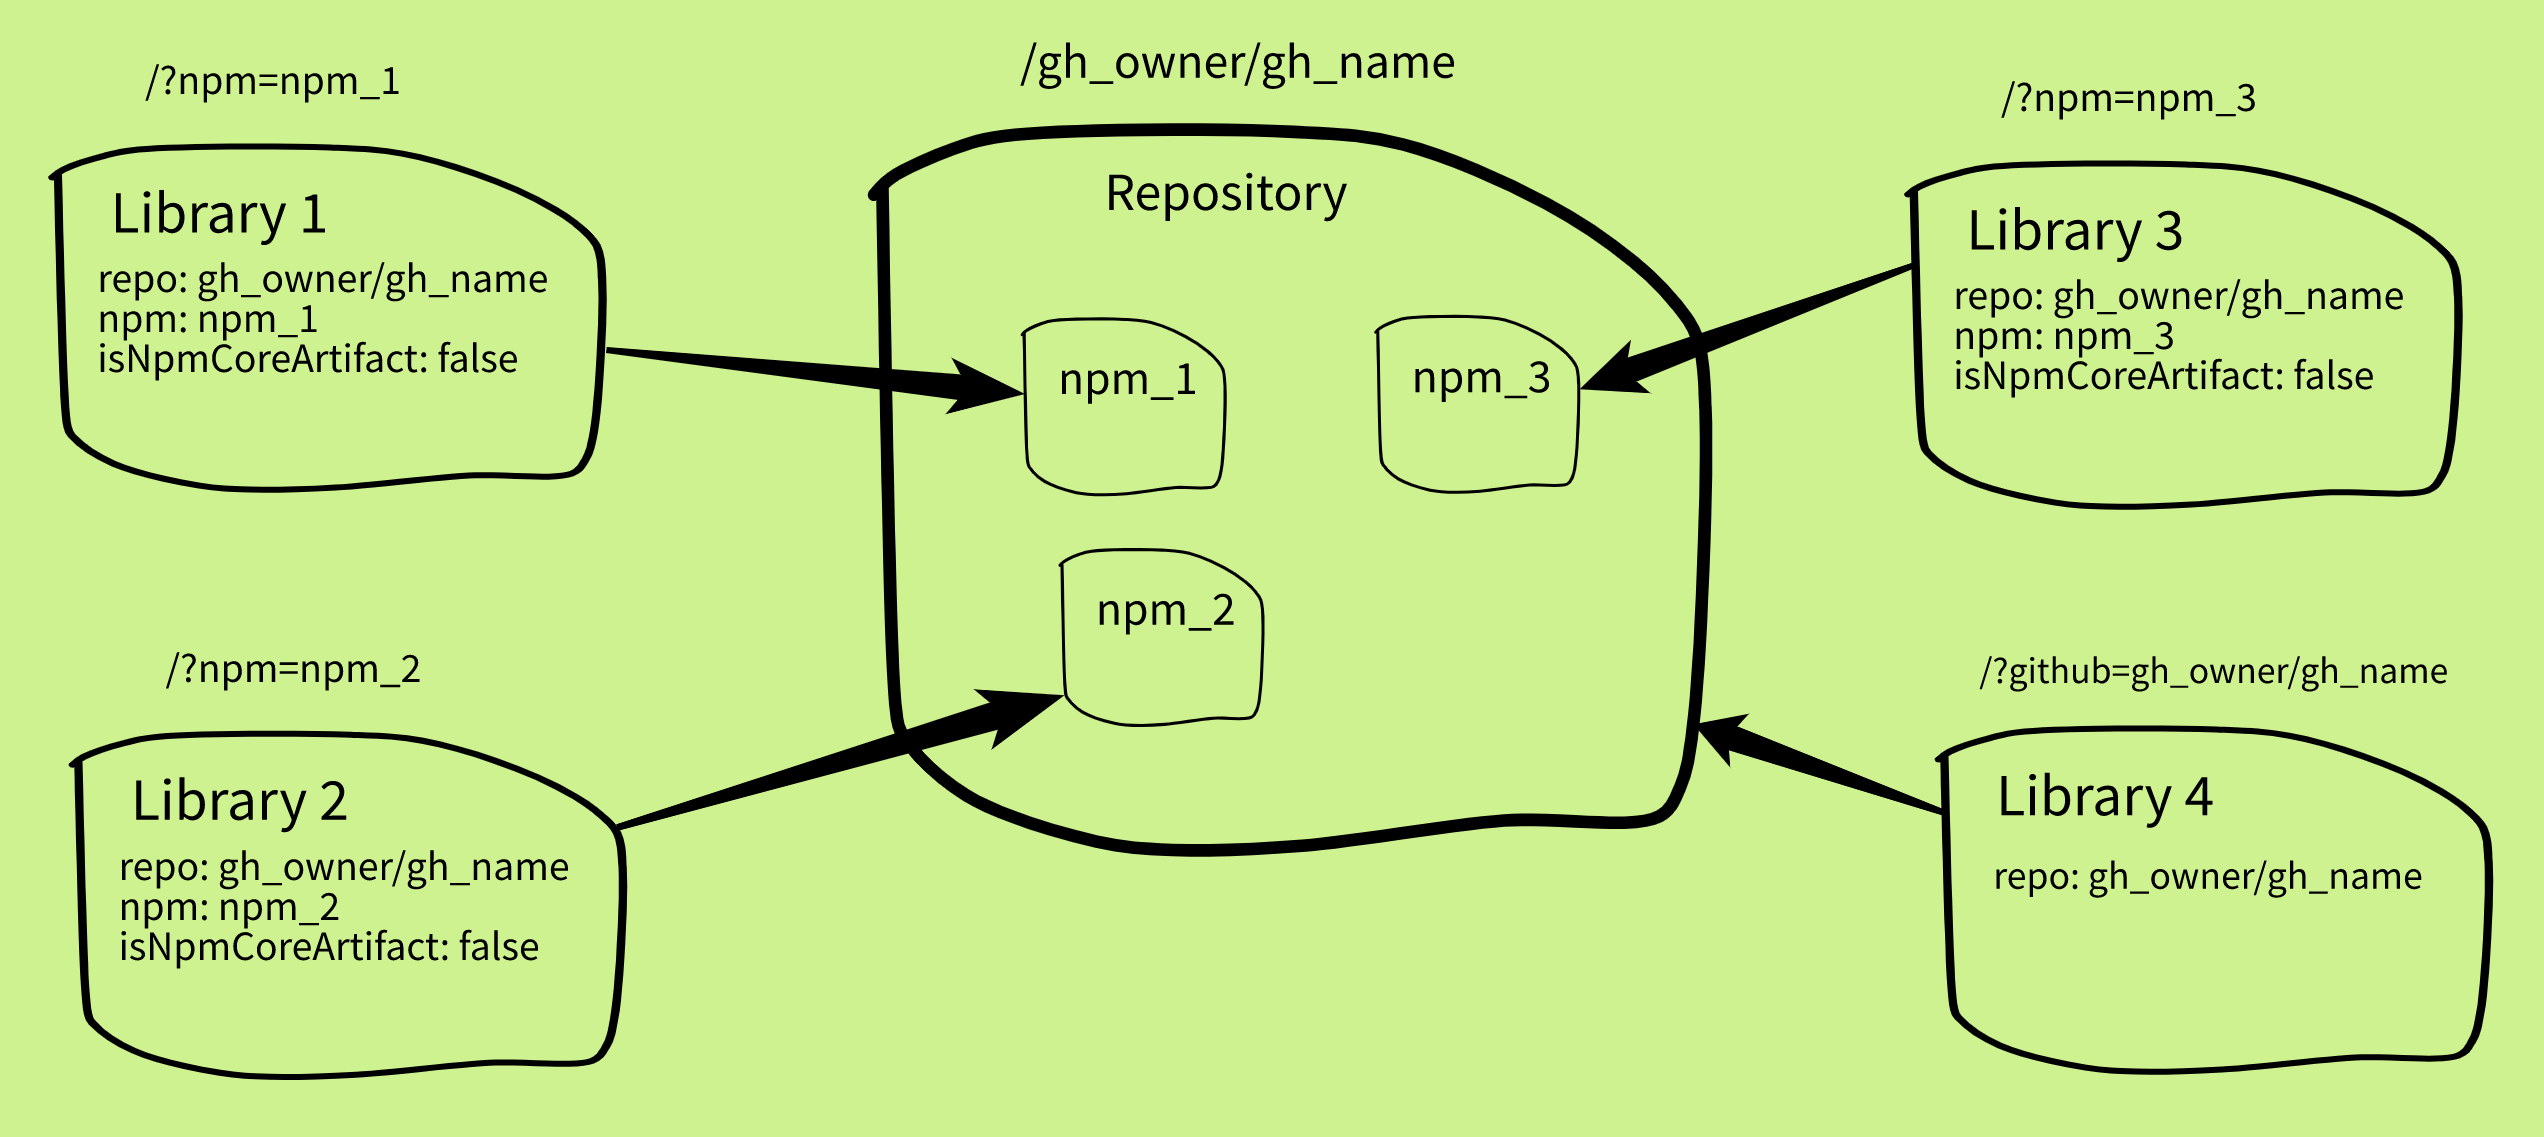 image illustrating relationship between a repostory and Moiva library